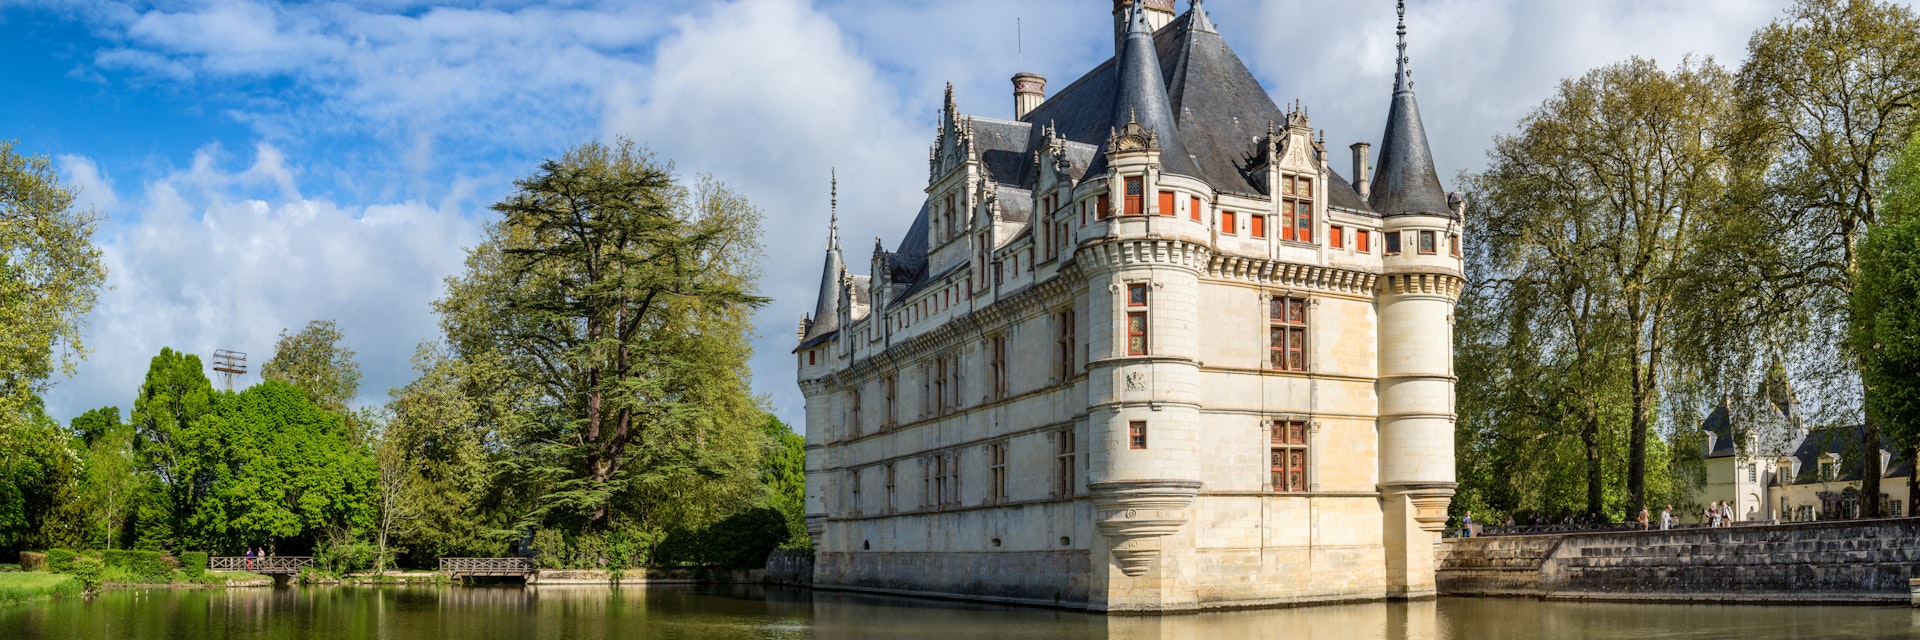 May 11, 2013: Exterior of the chateau at Azay le Rideau in the Loire.
1122888986
architecture, azay, azay-le-rideau, building, castle, chateau, chateaux, culture, day, europe, exterior, facade, famous, france, french, heritage, historical, history, lake, landmark, landscape, le, loire, medieval, old, outdoor, palace, reflection, renaissance, rideau, sky, summer, sunny, time, tourism, tower, traditional, travel, unesco, valley, water